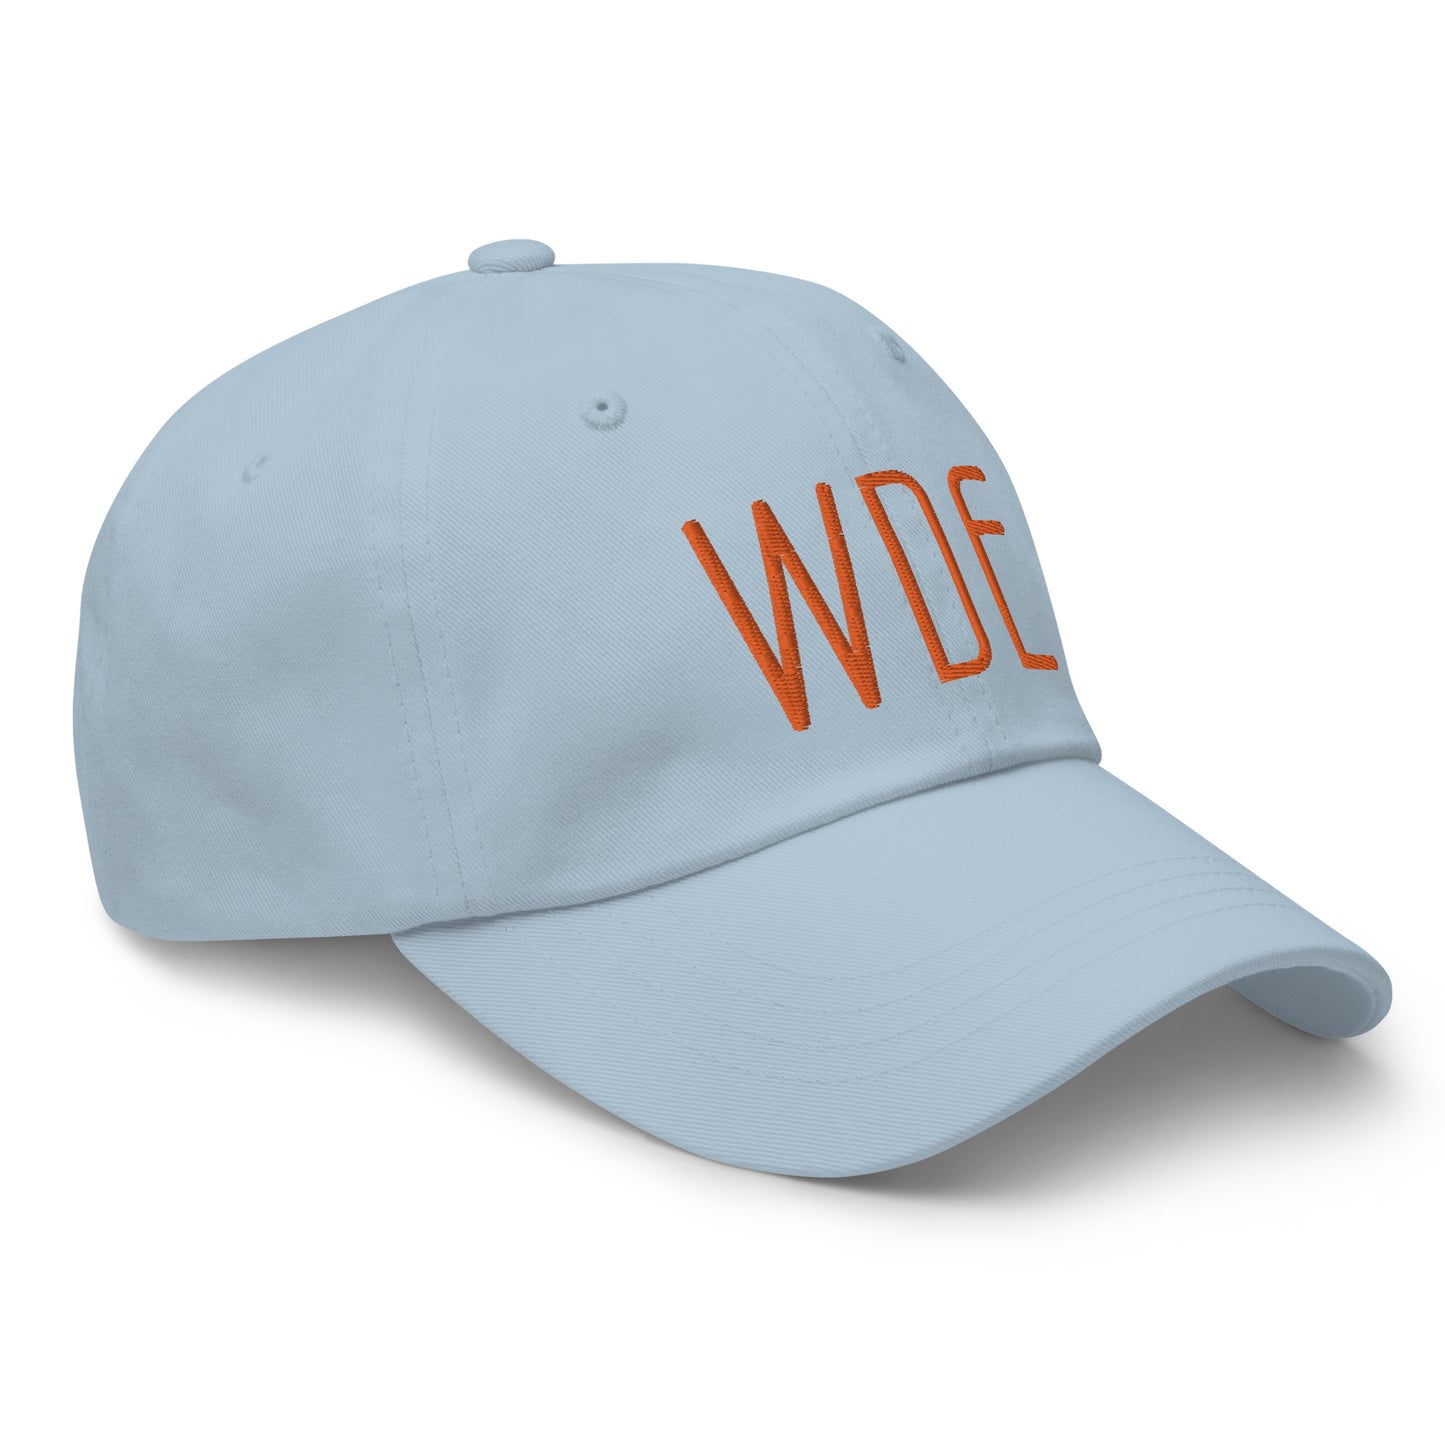 WDE Adult Hat